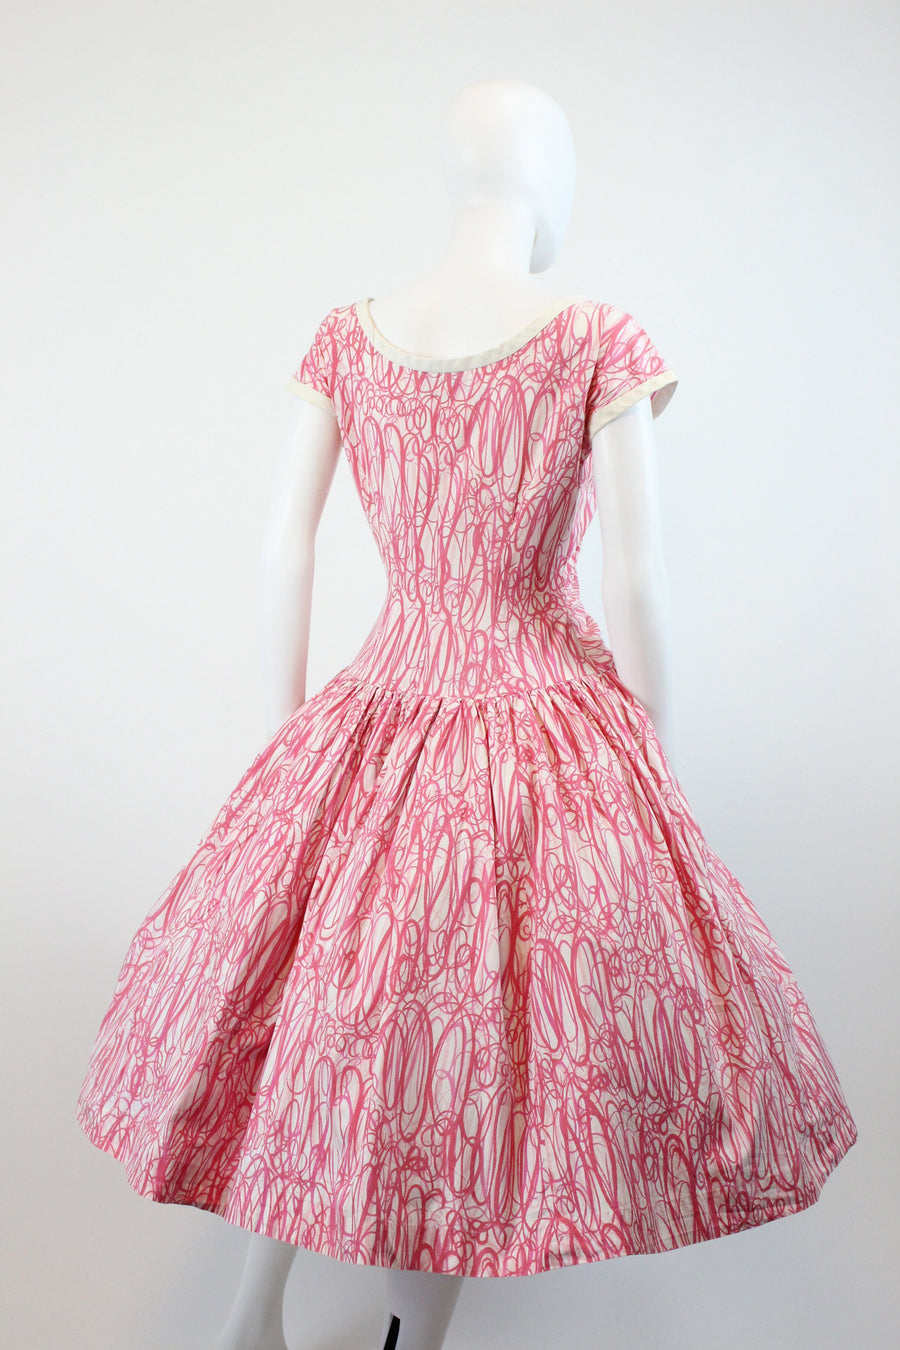 1950s Pat Hartley swirl dress small | vintage cotton button front dress | new in